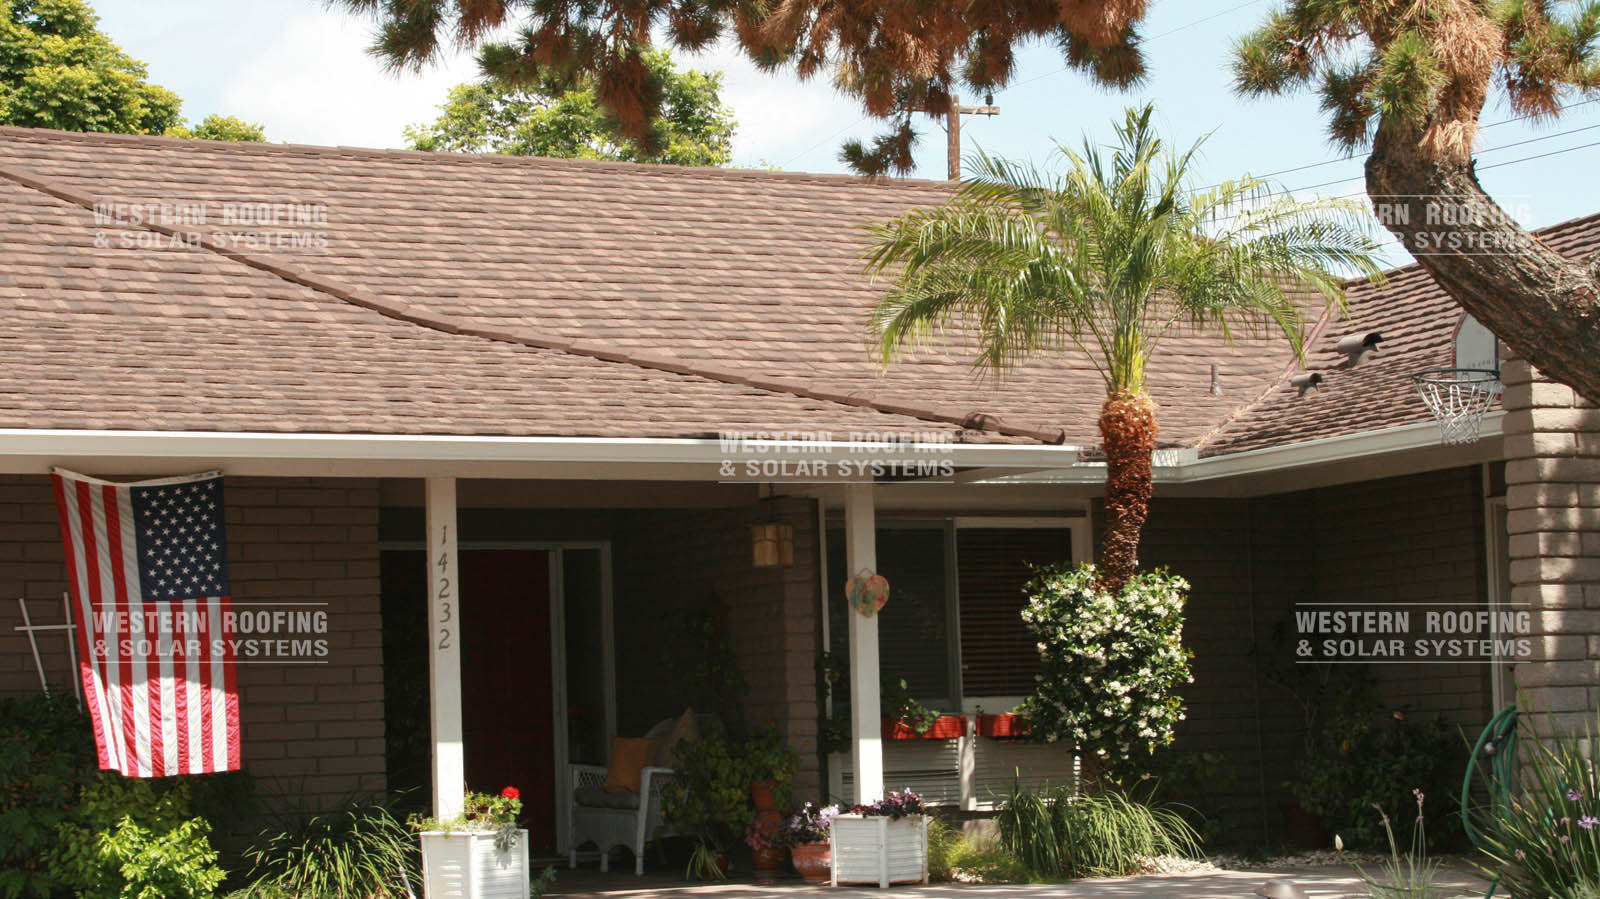 California Asphalt Shingle Roofing Metal Roof And Solar System Specialist